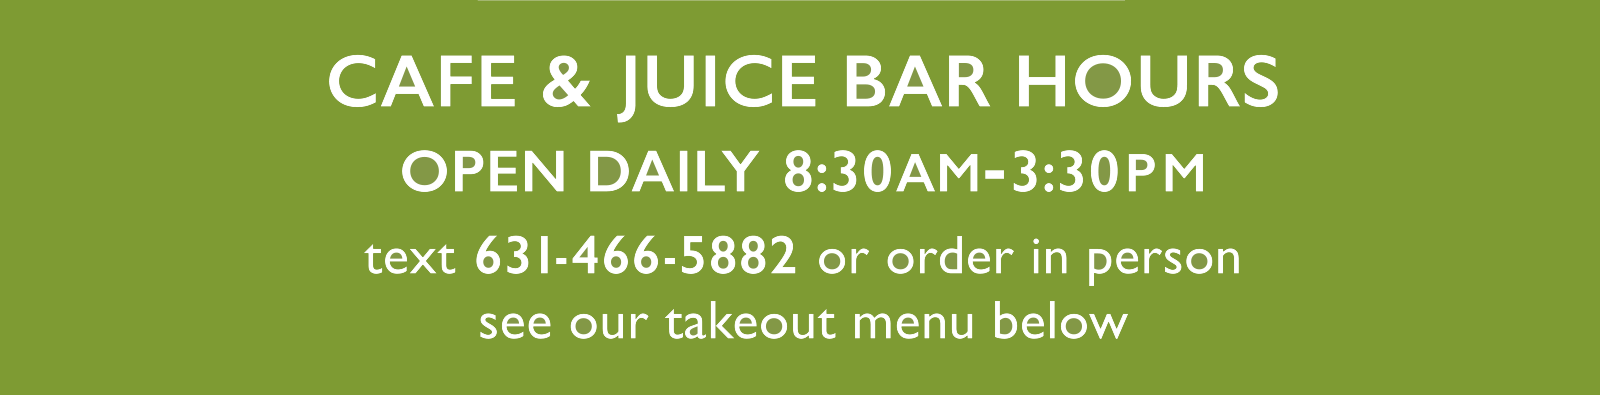 CAFE & JUICE BAR HOURS: Open Daily 8:30am-3:30pm - text 631-466-5882 or order in person - see our takeout menu below